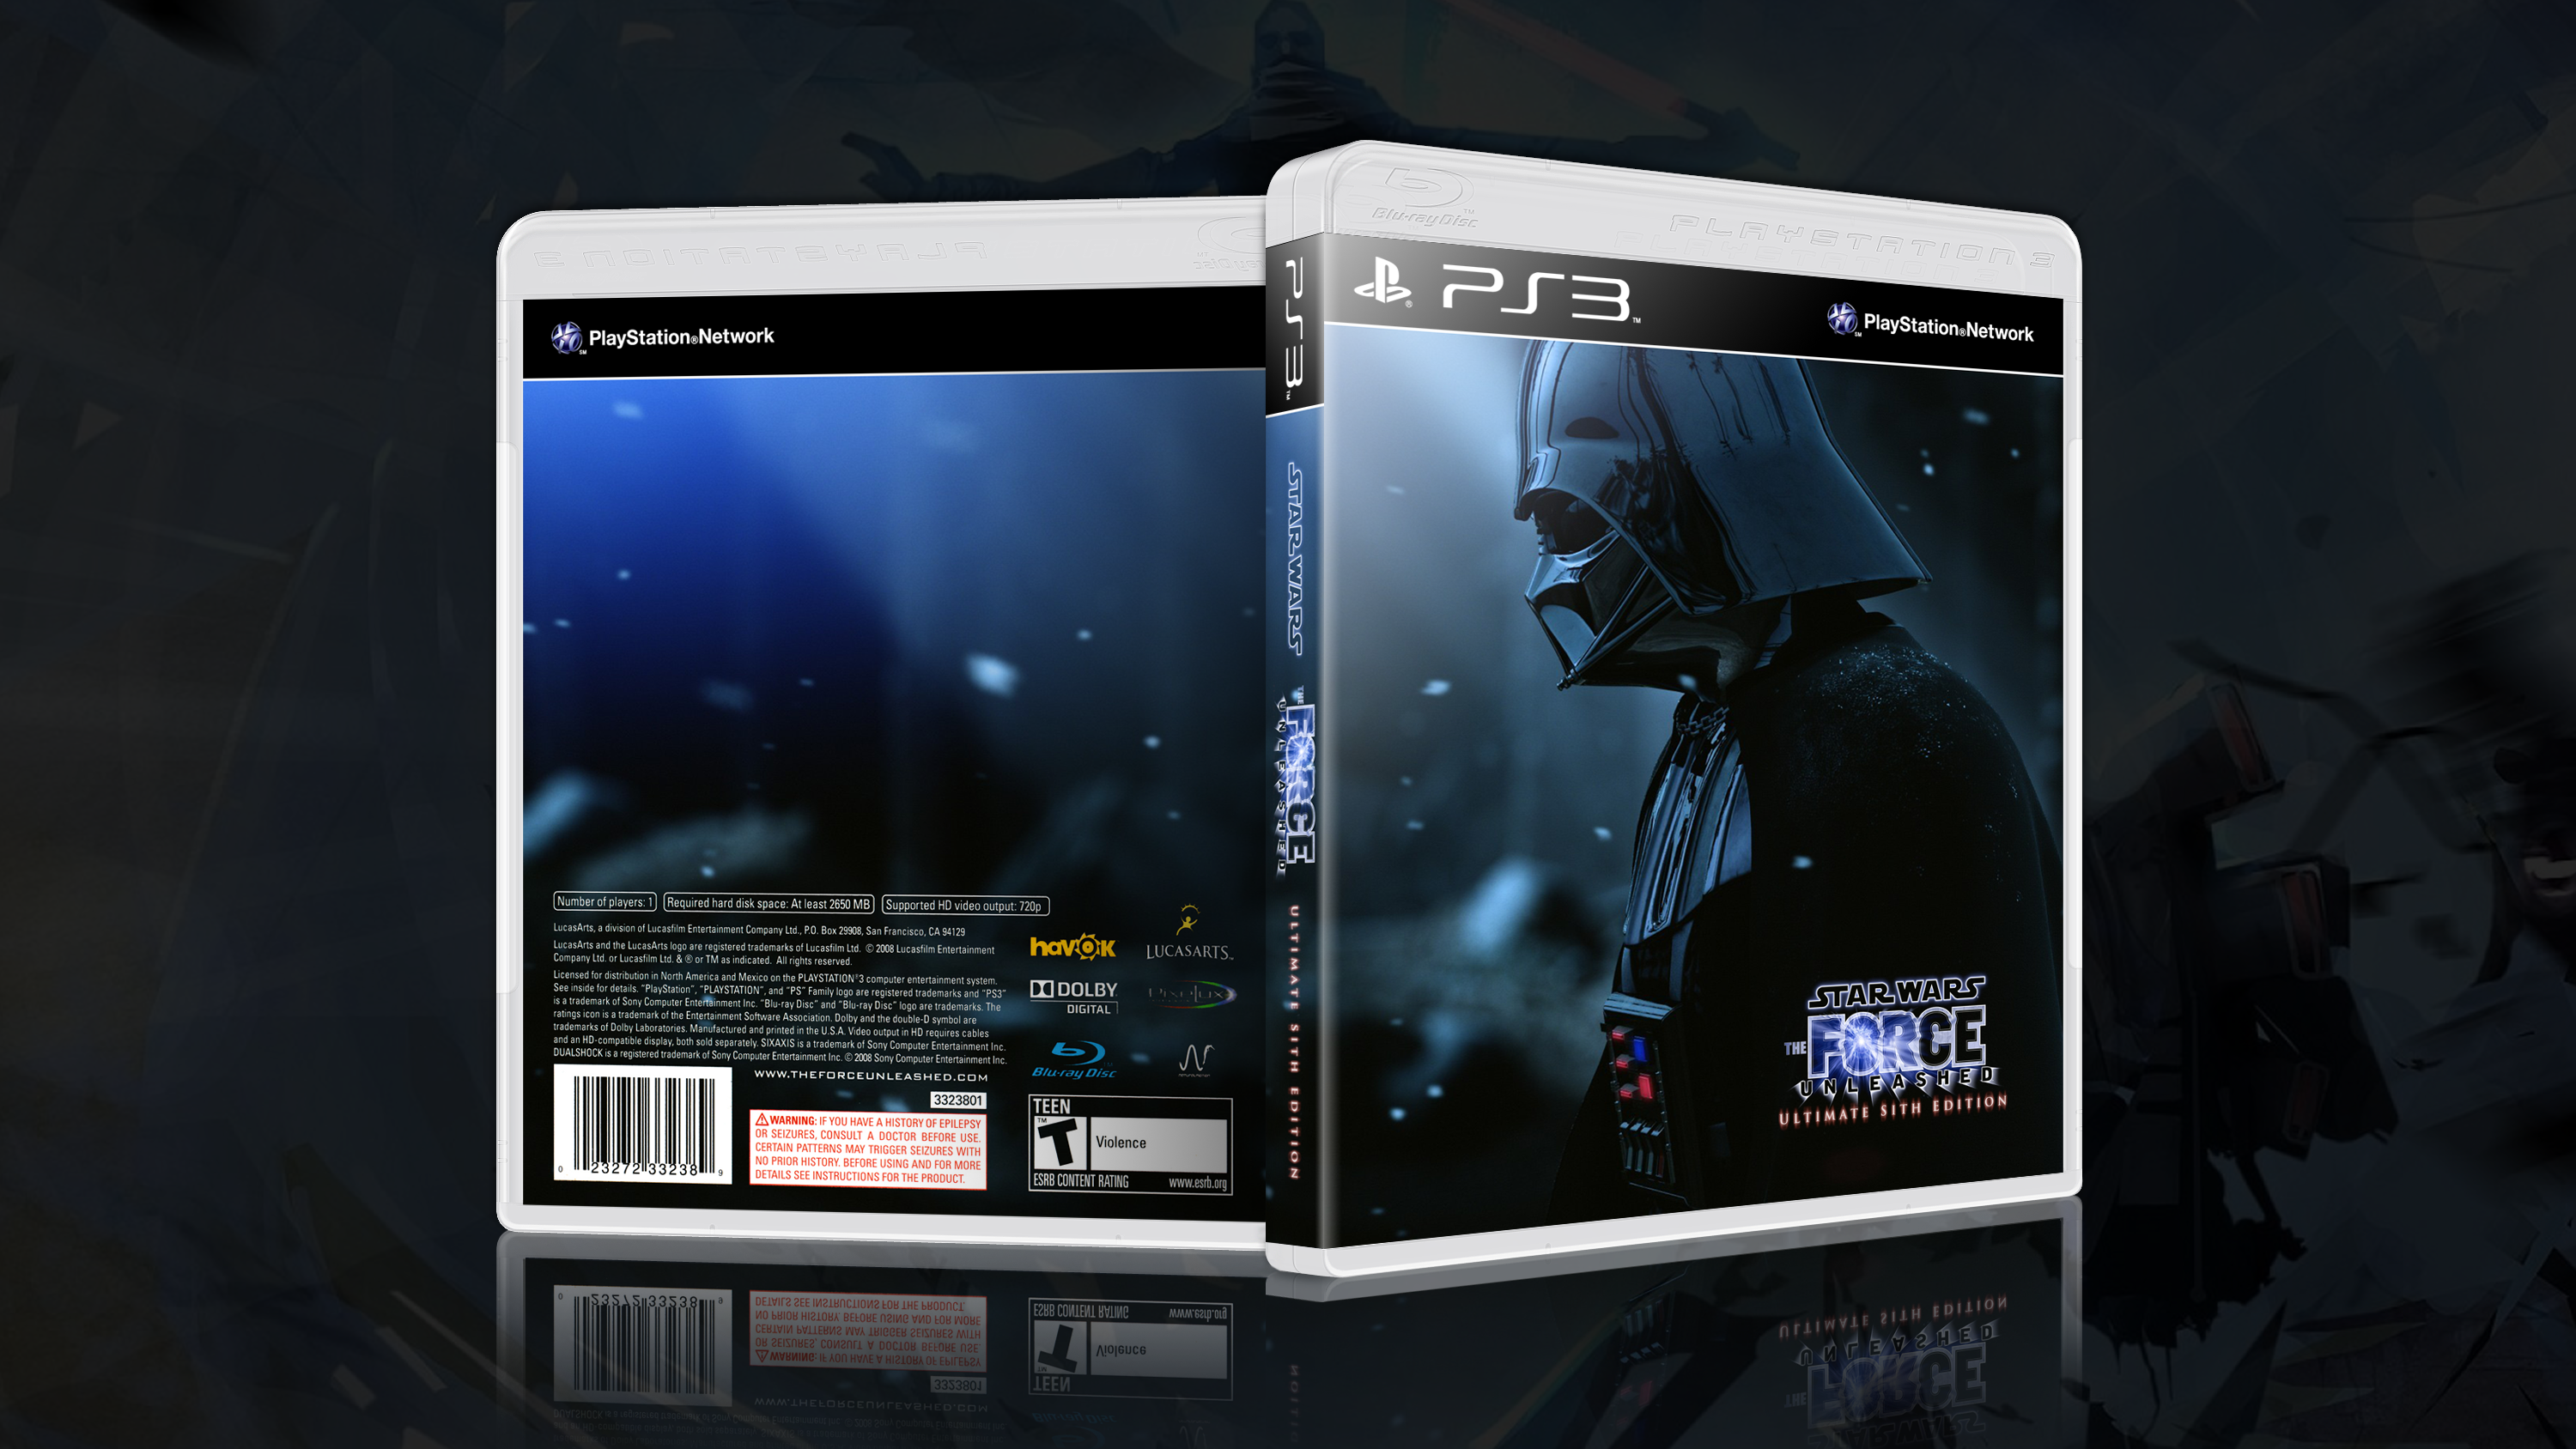 Star Wars: The Force Unleashed - Sith Edition box cover